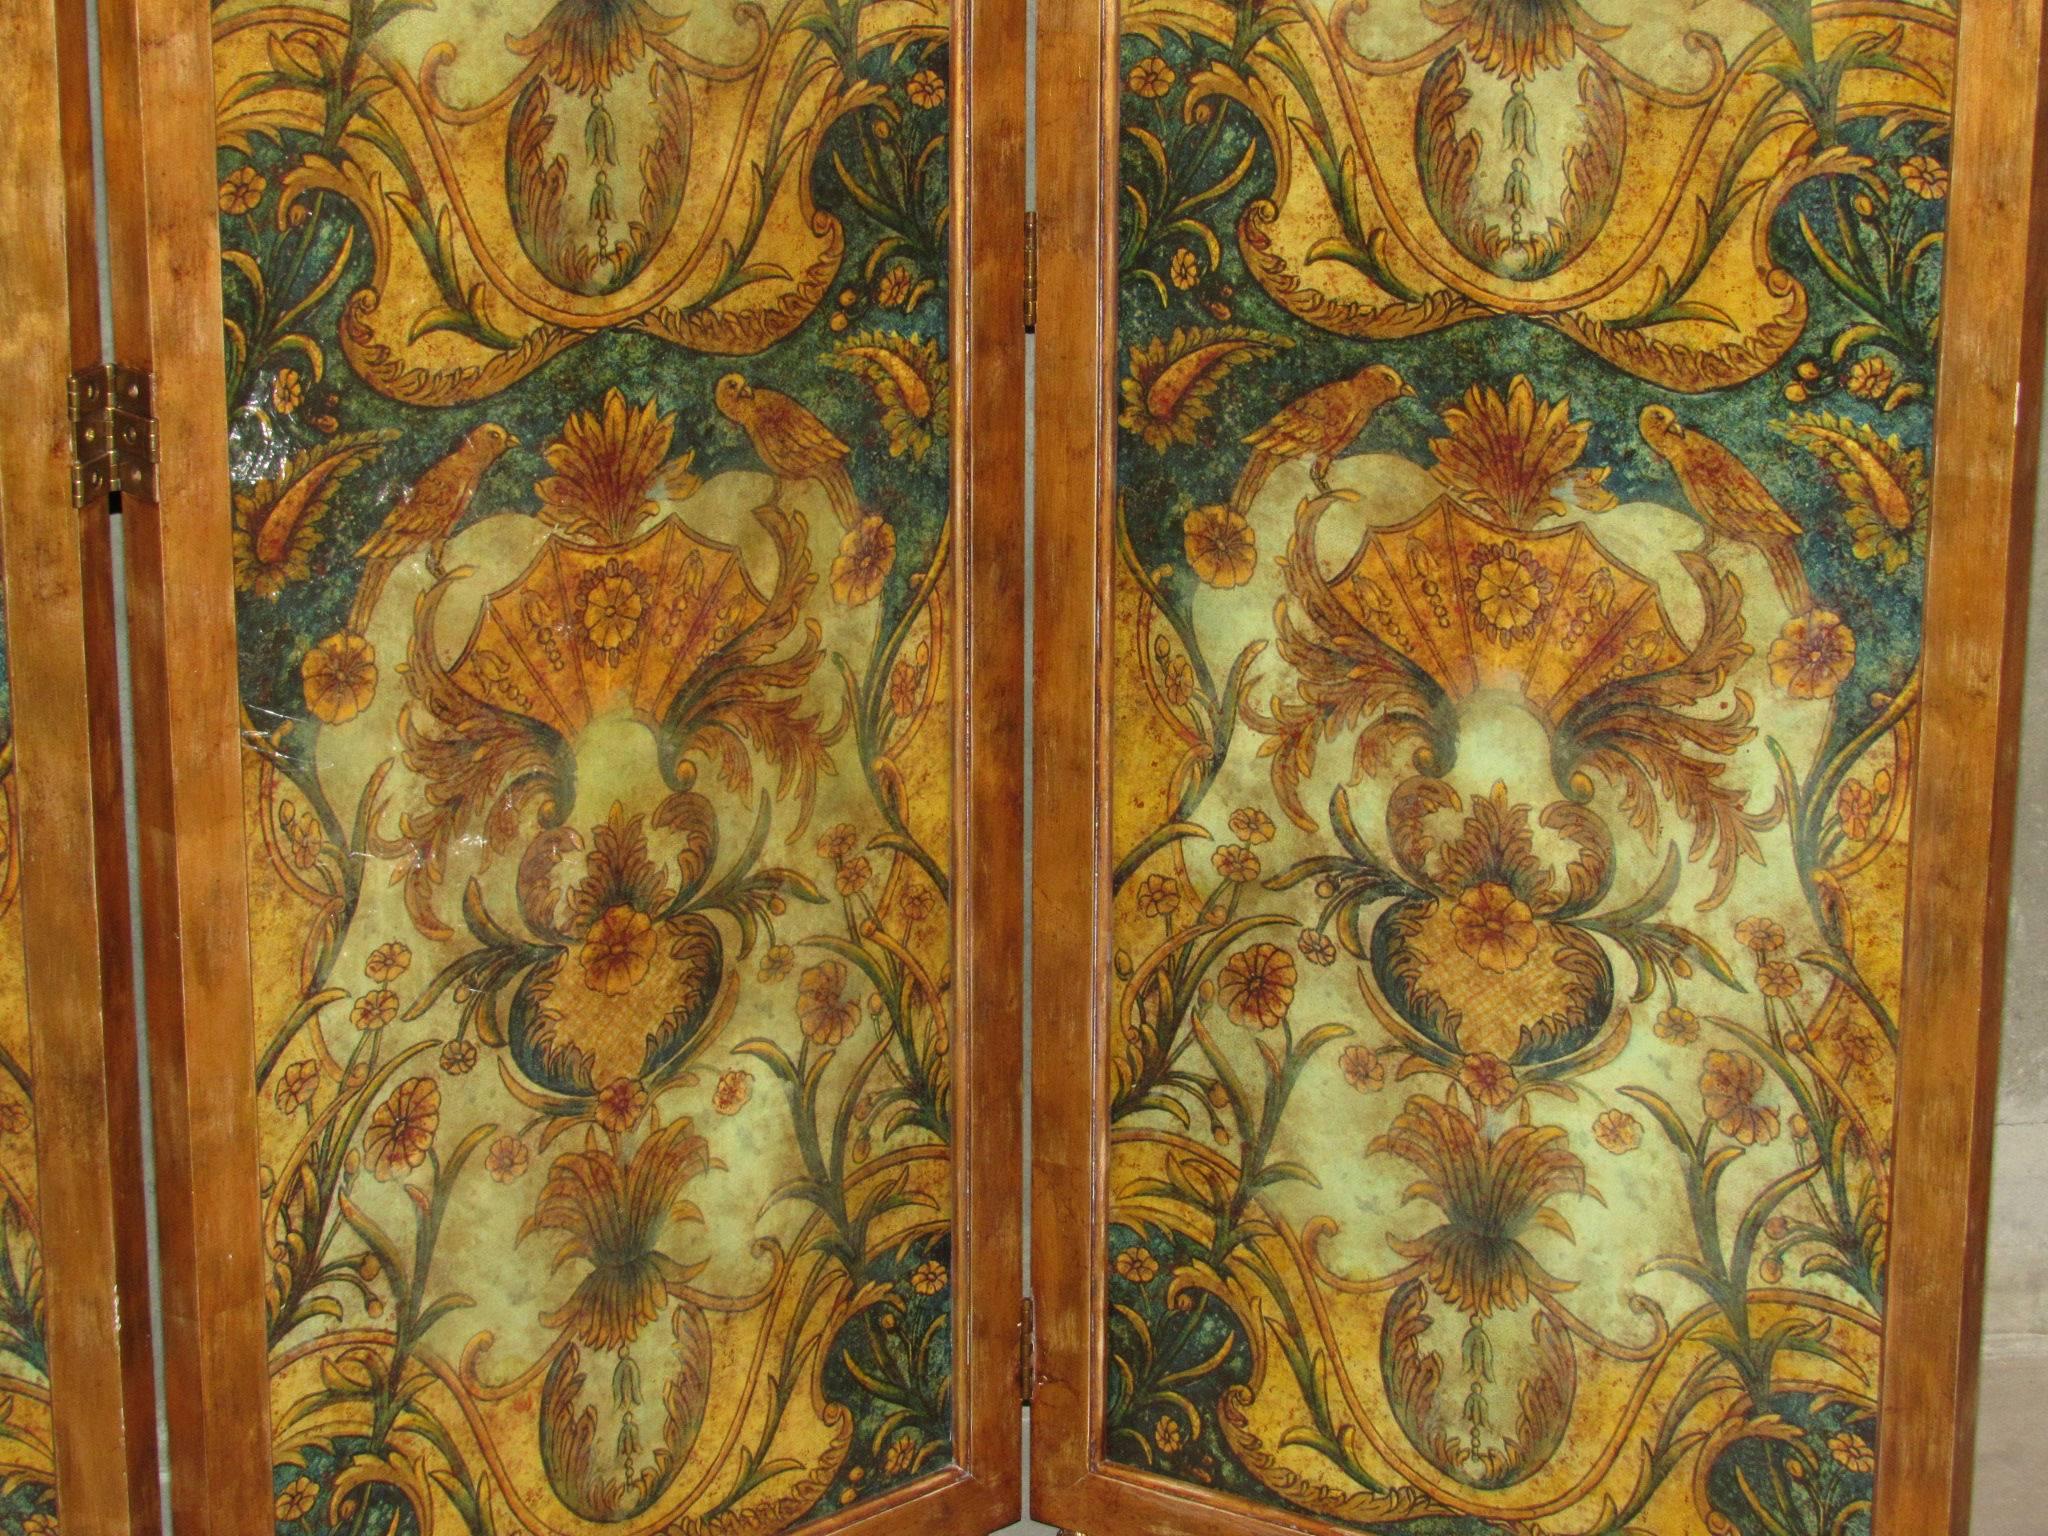 Room divider screen by Maitland-Smith 1990s.  Six panels, three and three that can be joined.  Mahogany gilded frames with painted glass inserts.  Each panel sits on two gold feet, making the screen appear to float just slightly off the ground.